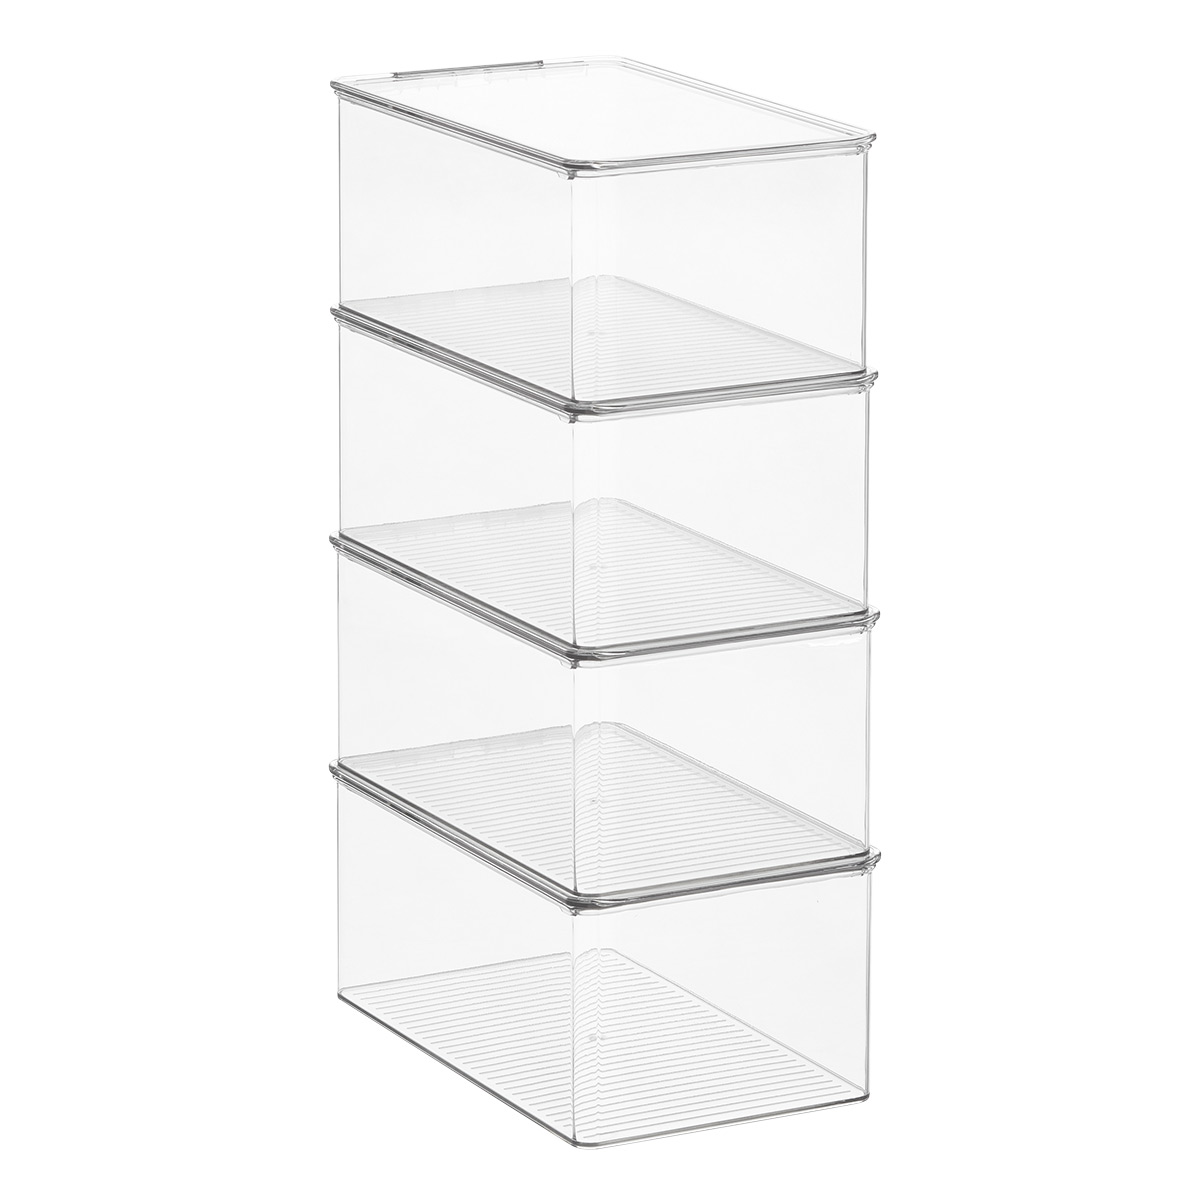 https://www.containerstore.com/catalogimages/477950/10092640-idesign-4-case-hinged-lid-s.jpg